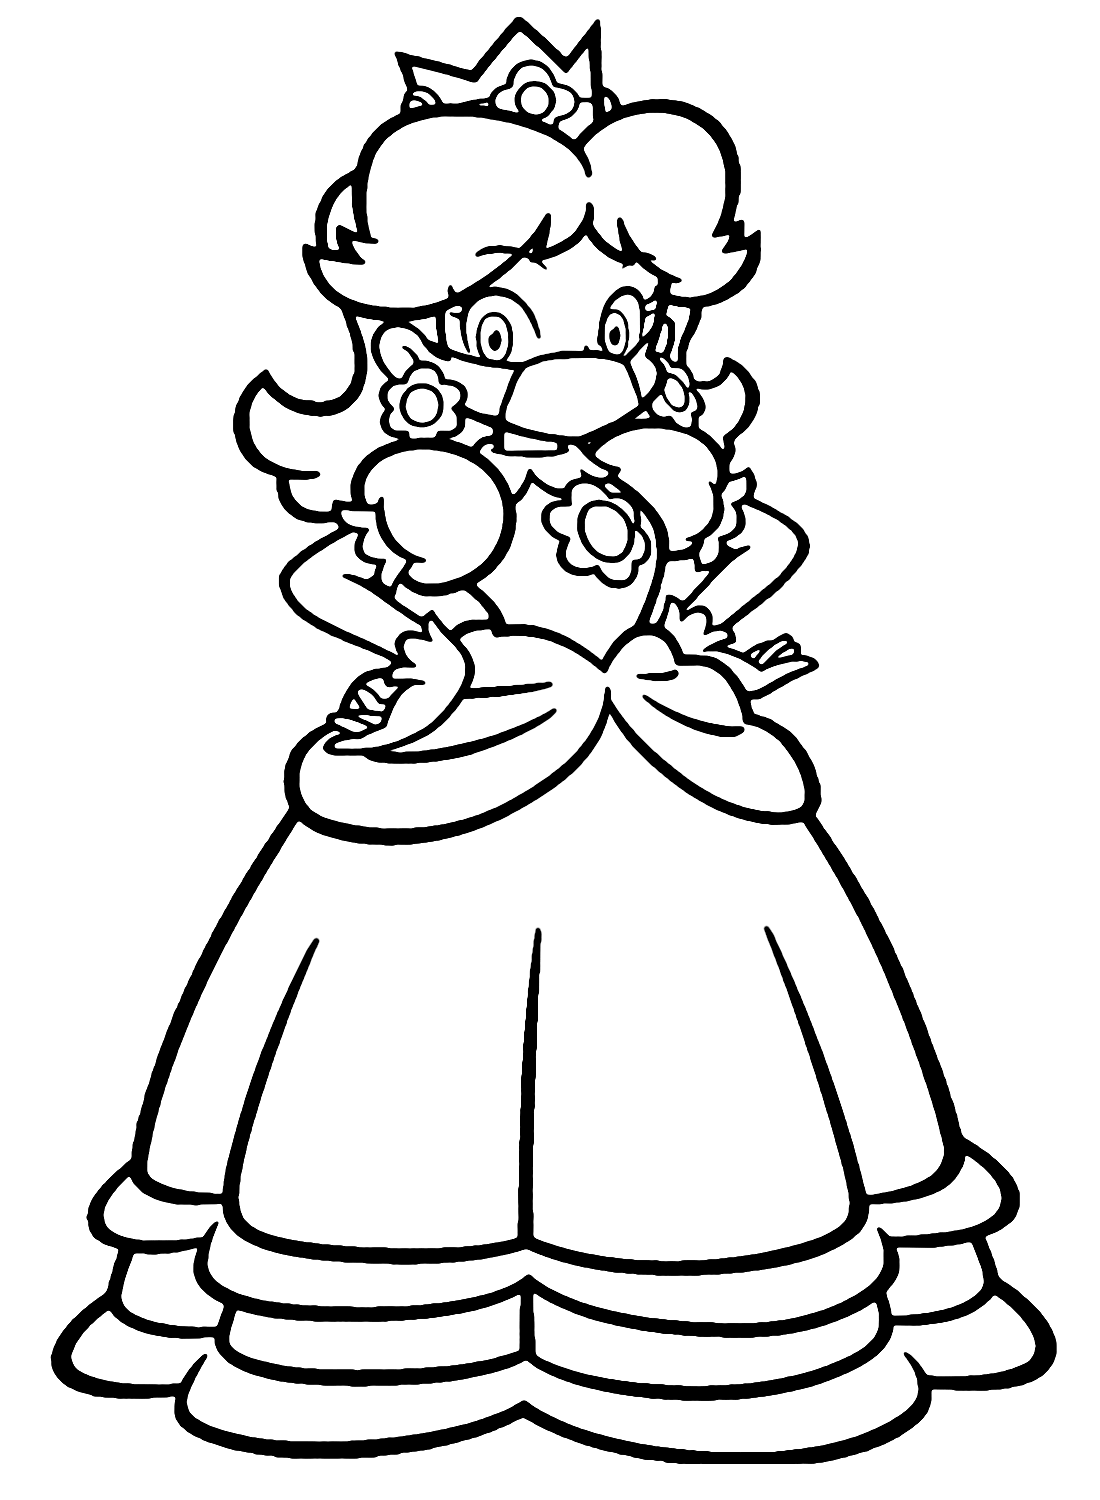 Princess Daisy with Mask Coloring Page